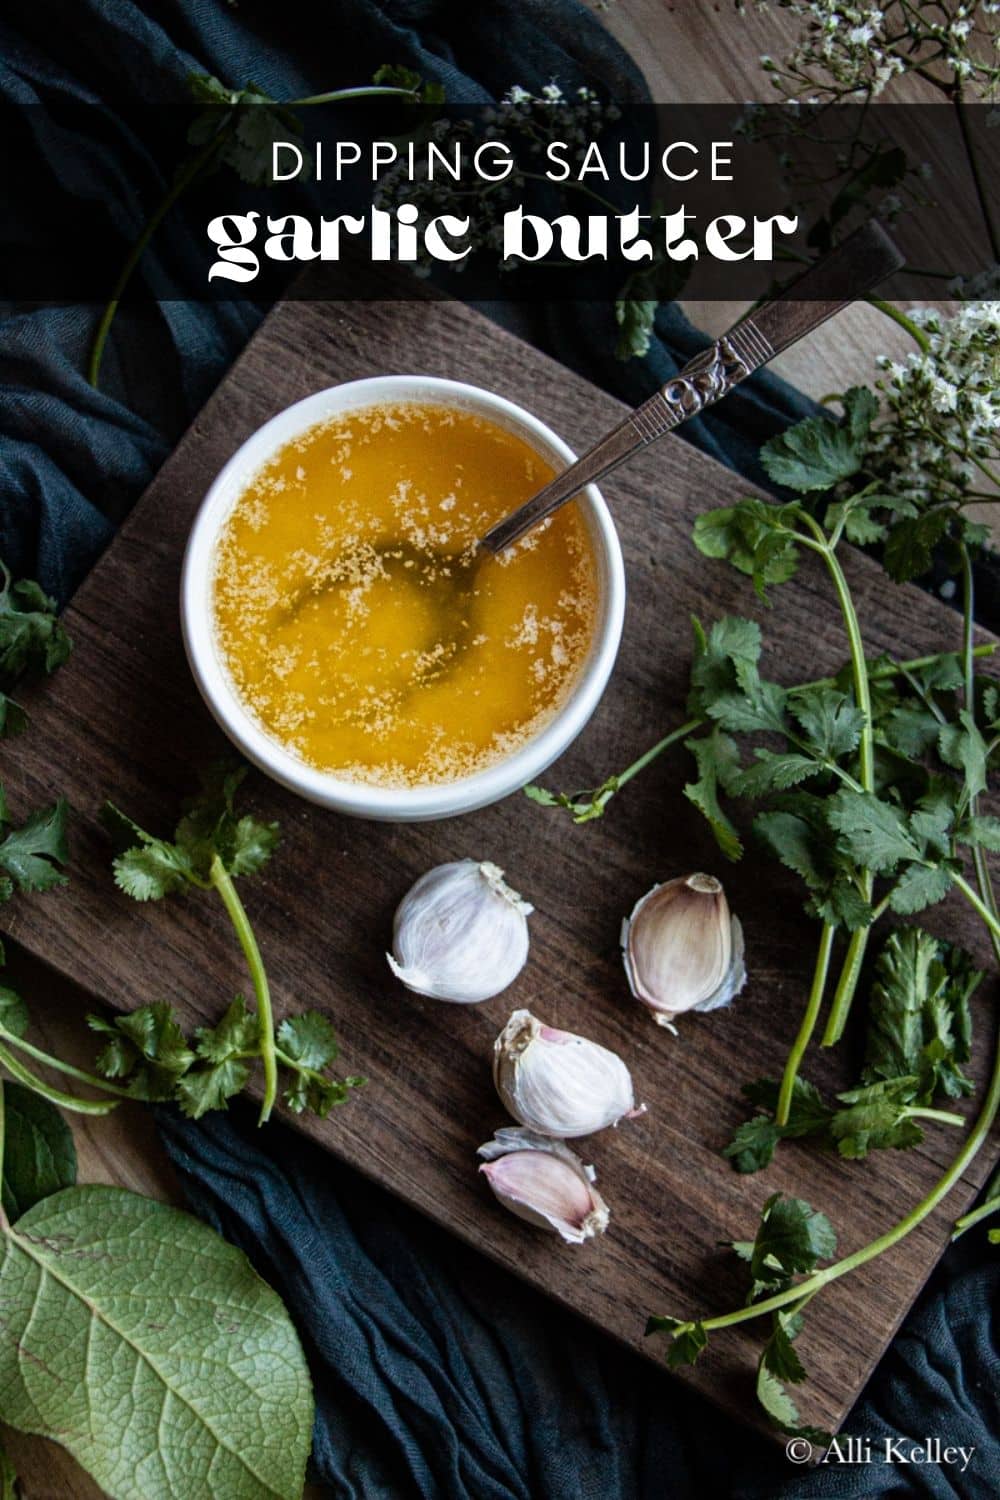 With just a few simple ingredients, you can whip up an incredibly tasty garlic dipping sauce in no time! This vibrant and versatile condiment will seriously make your meals come to life! My garlic butter dipping sauce perfectly complements various dishes, from crispy oven-baked chicken wings to freshly-made pizza.